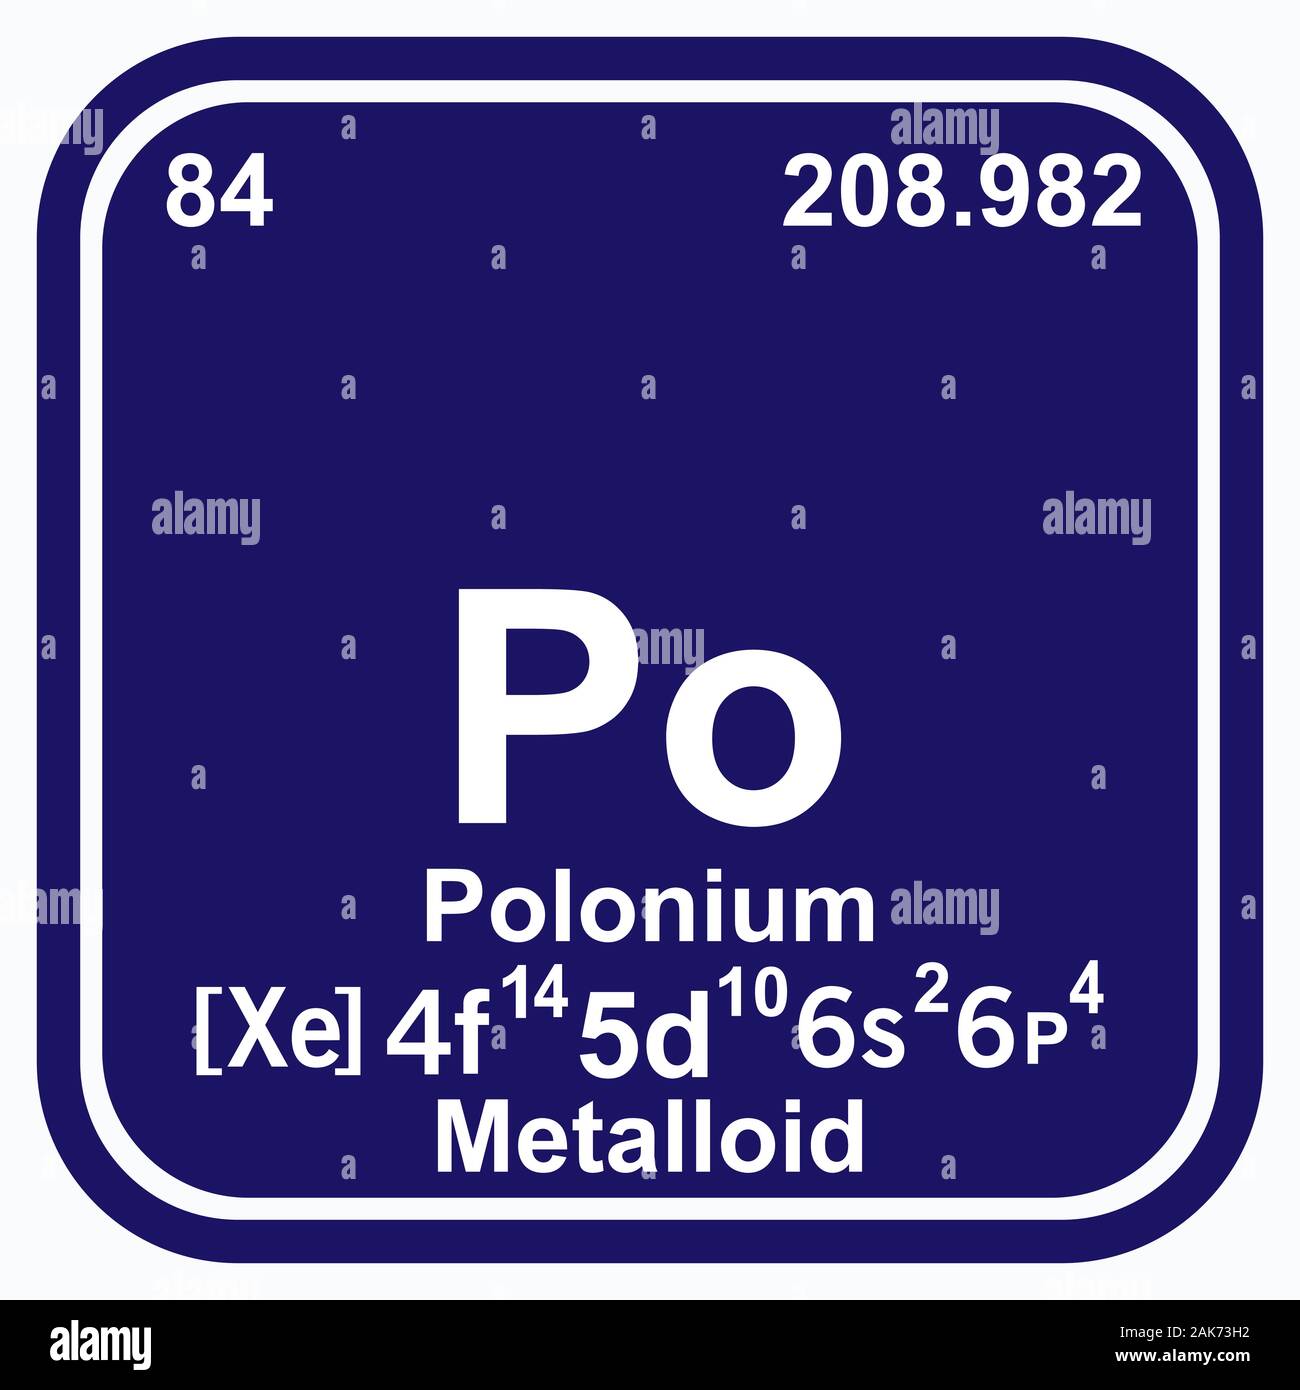 Polonium Periodic Table of the Elements Vector illustration eps 10 Stock Vector